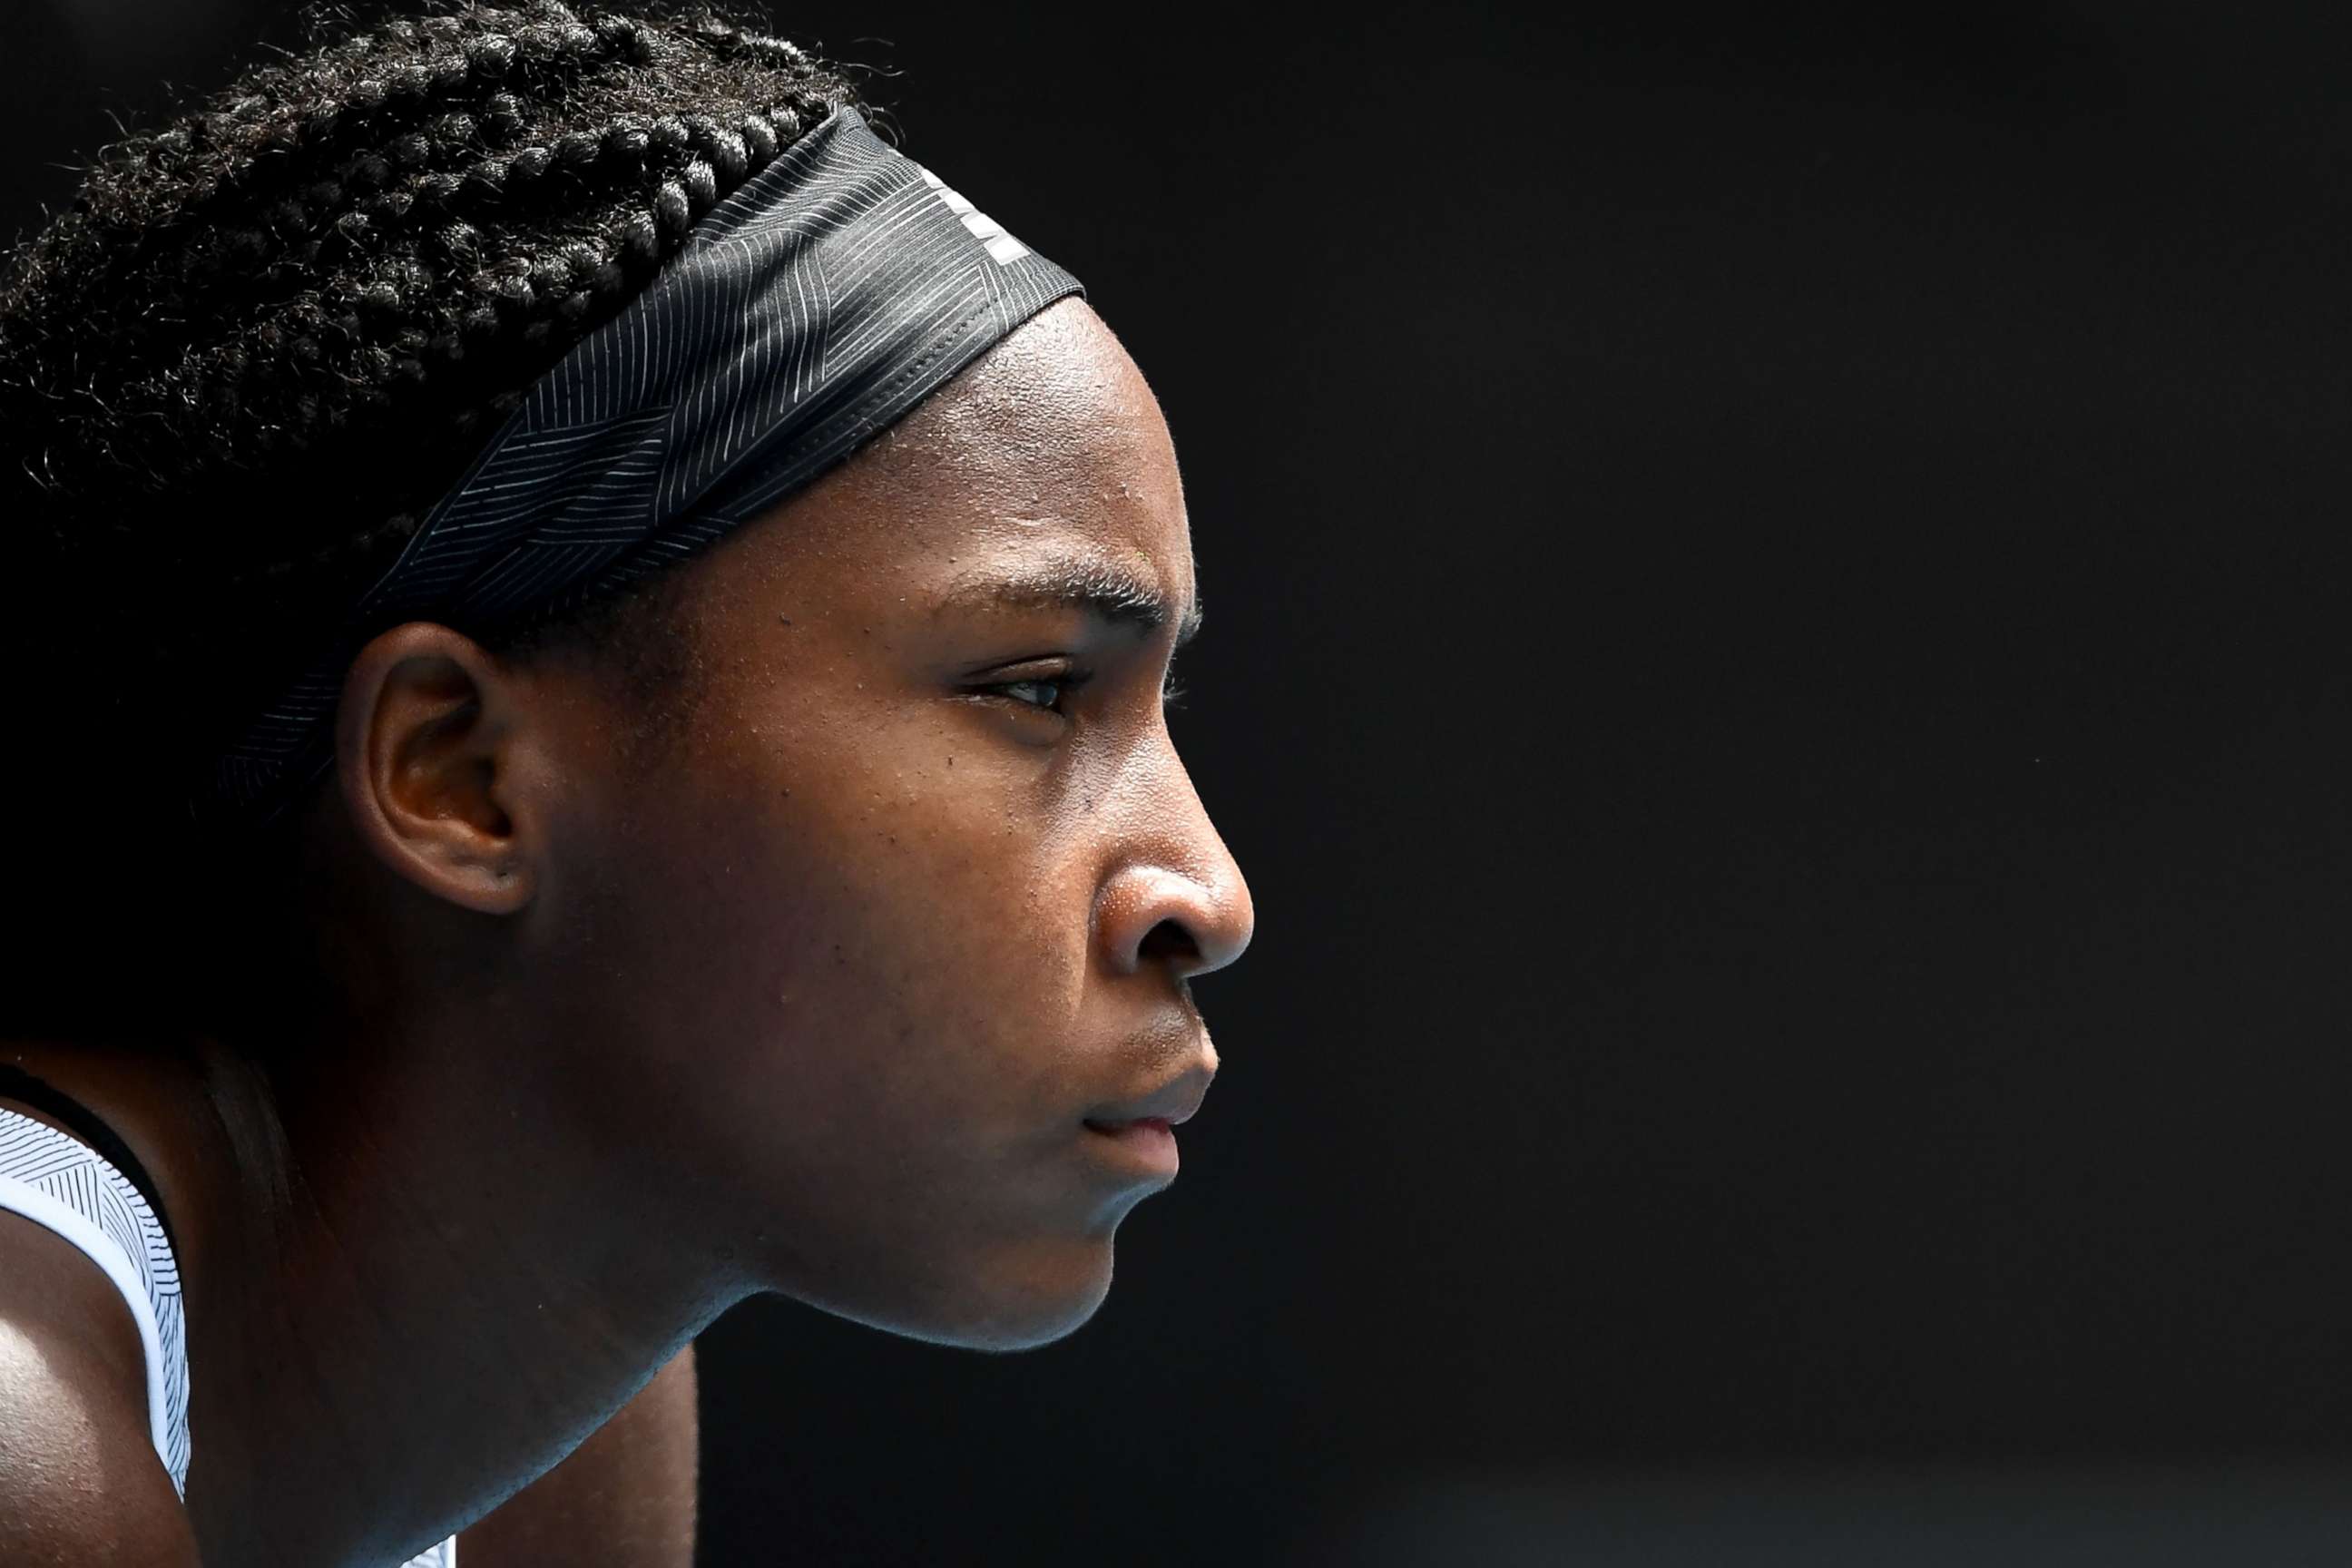 PHOTO: Coco Gauff at the Australian Open tennis tournament in Melbourne on Jan. 26, 2020.